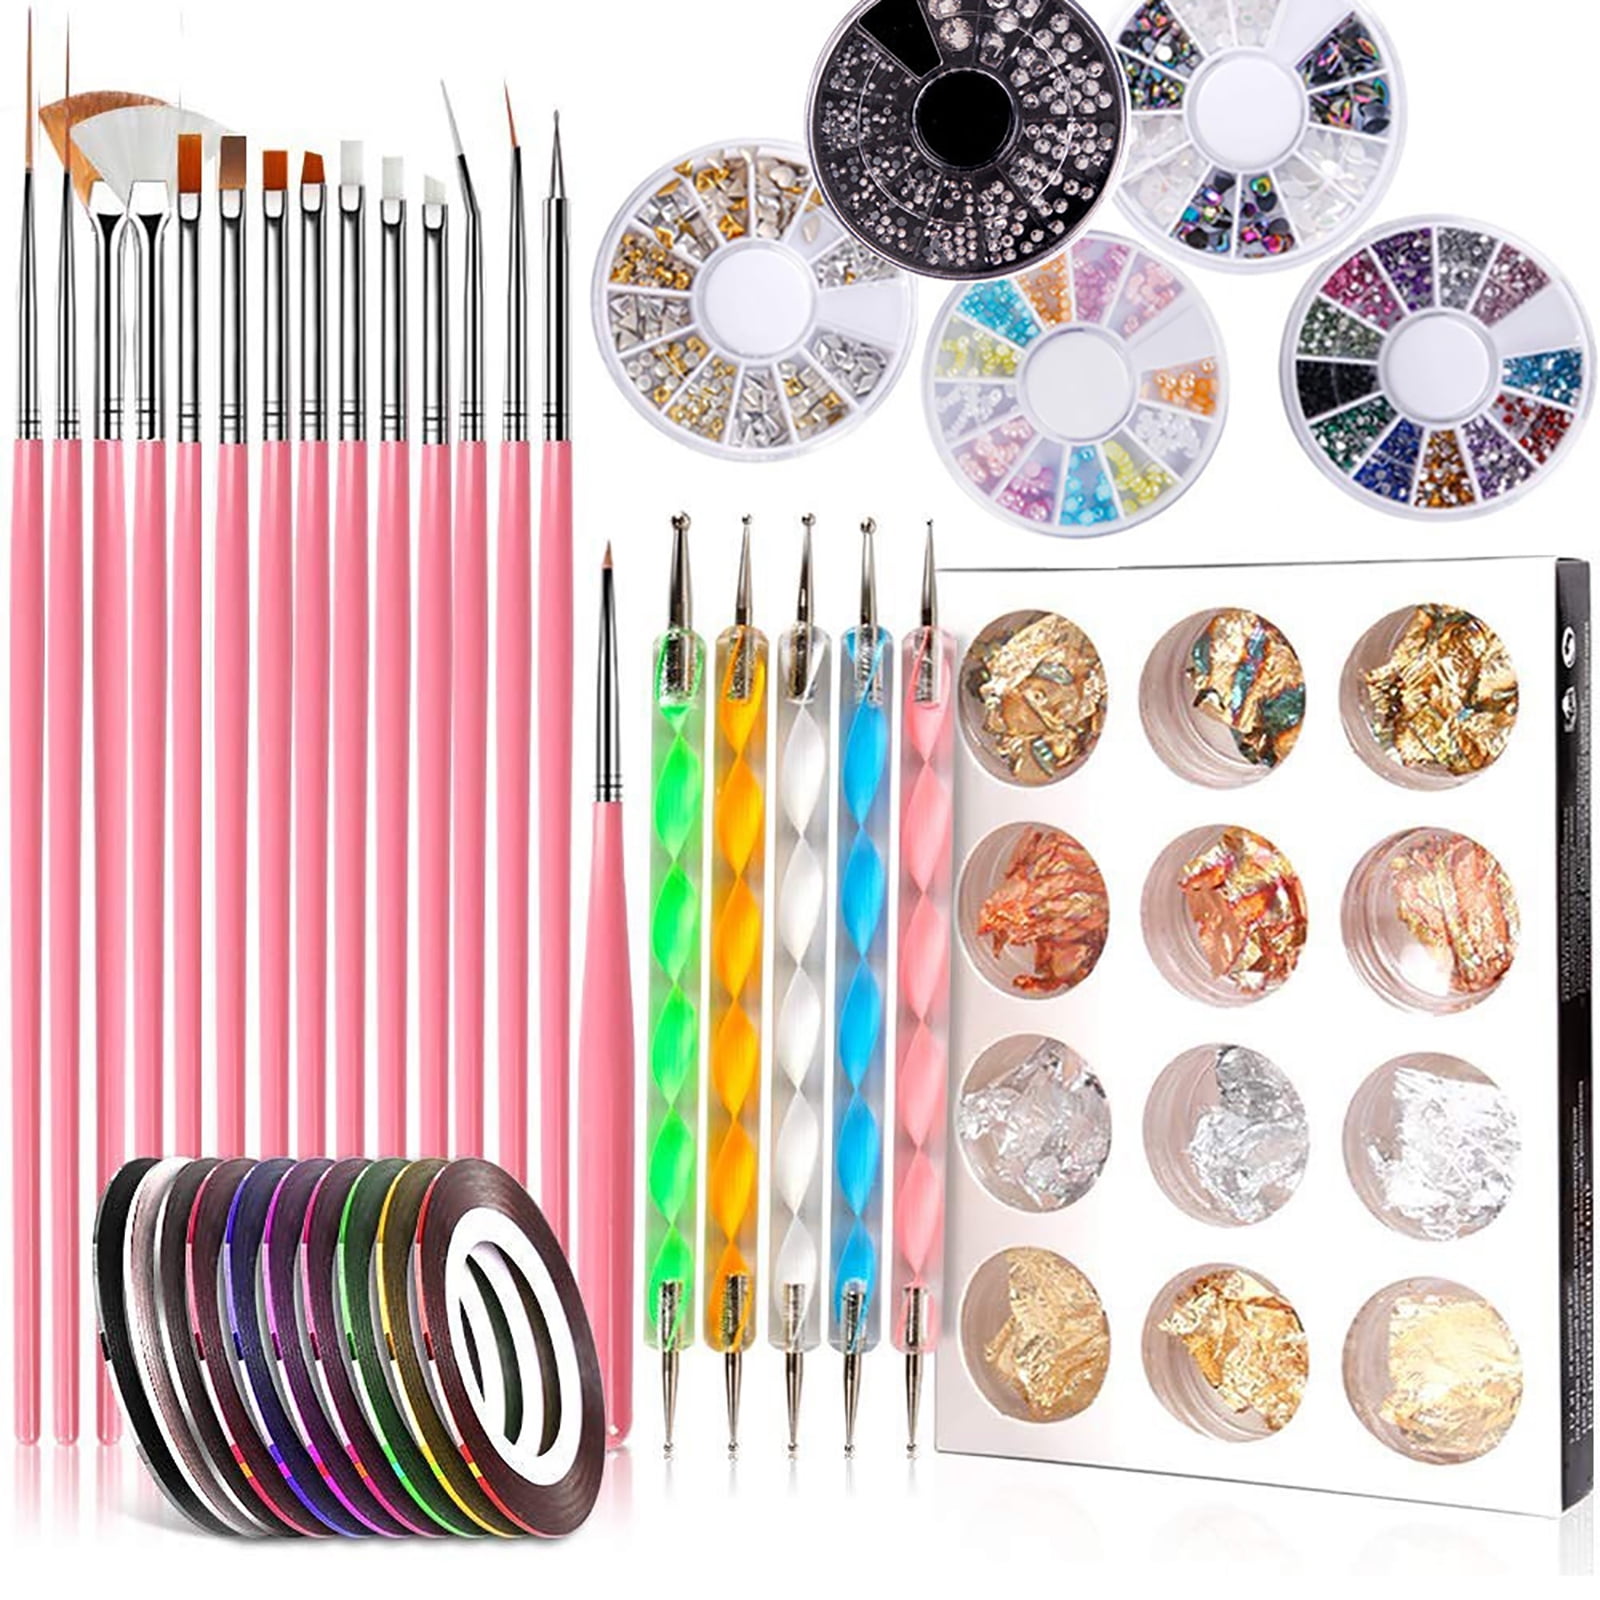 How to Feel Like a Pro Nail Tech with a Nail Art Kit! – Mylee